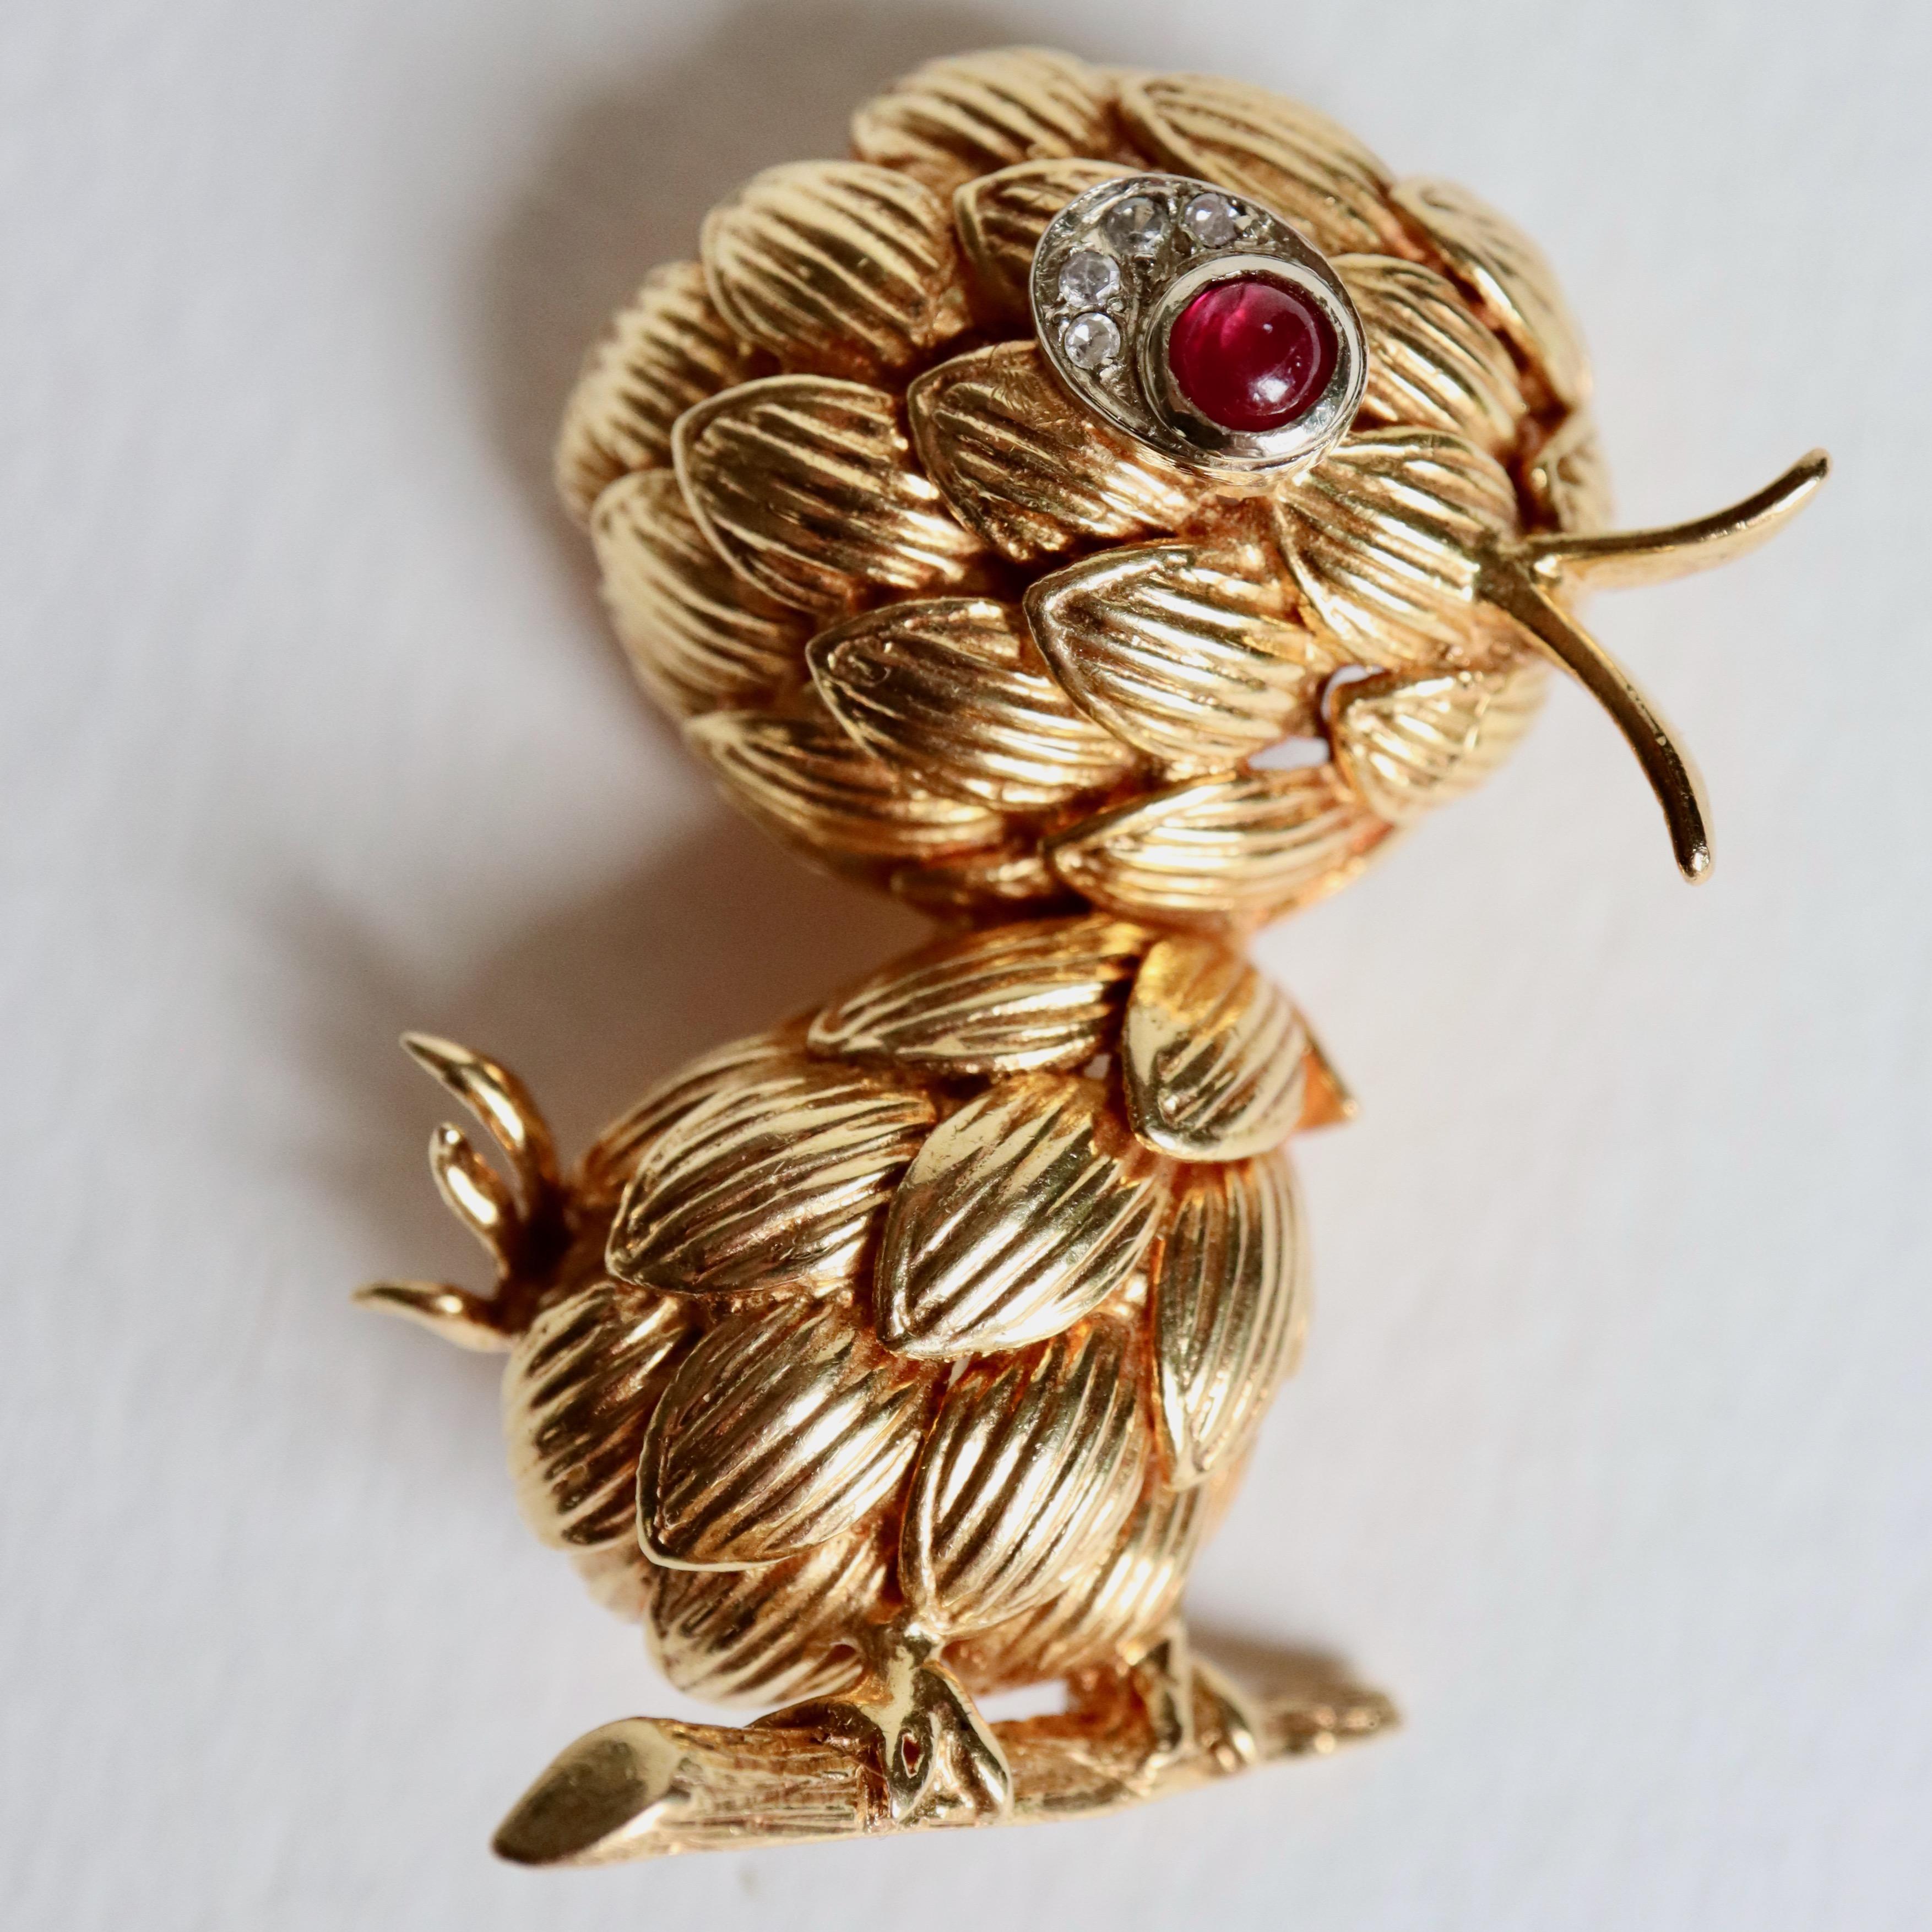 BOUCHERON Brooch representing a Chick in 18 kt yellow Gold, Eye in 18 carat white Gold set with a Cabochon Ruby and 4 Diamonds. Brooch Signed: BOUCHERON PARIS 
Gross weight: 20 g 
Height: 4 cm 
Width: 2.5 cm 
